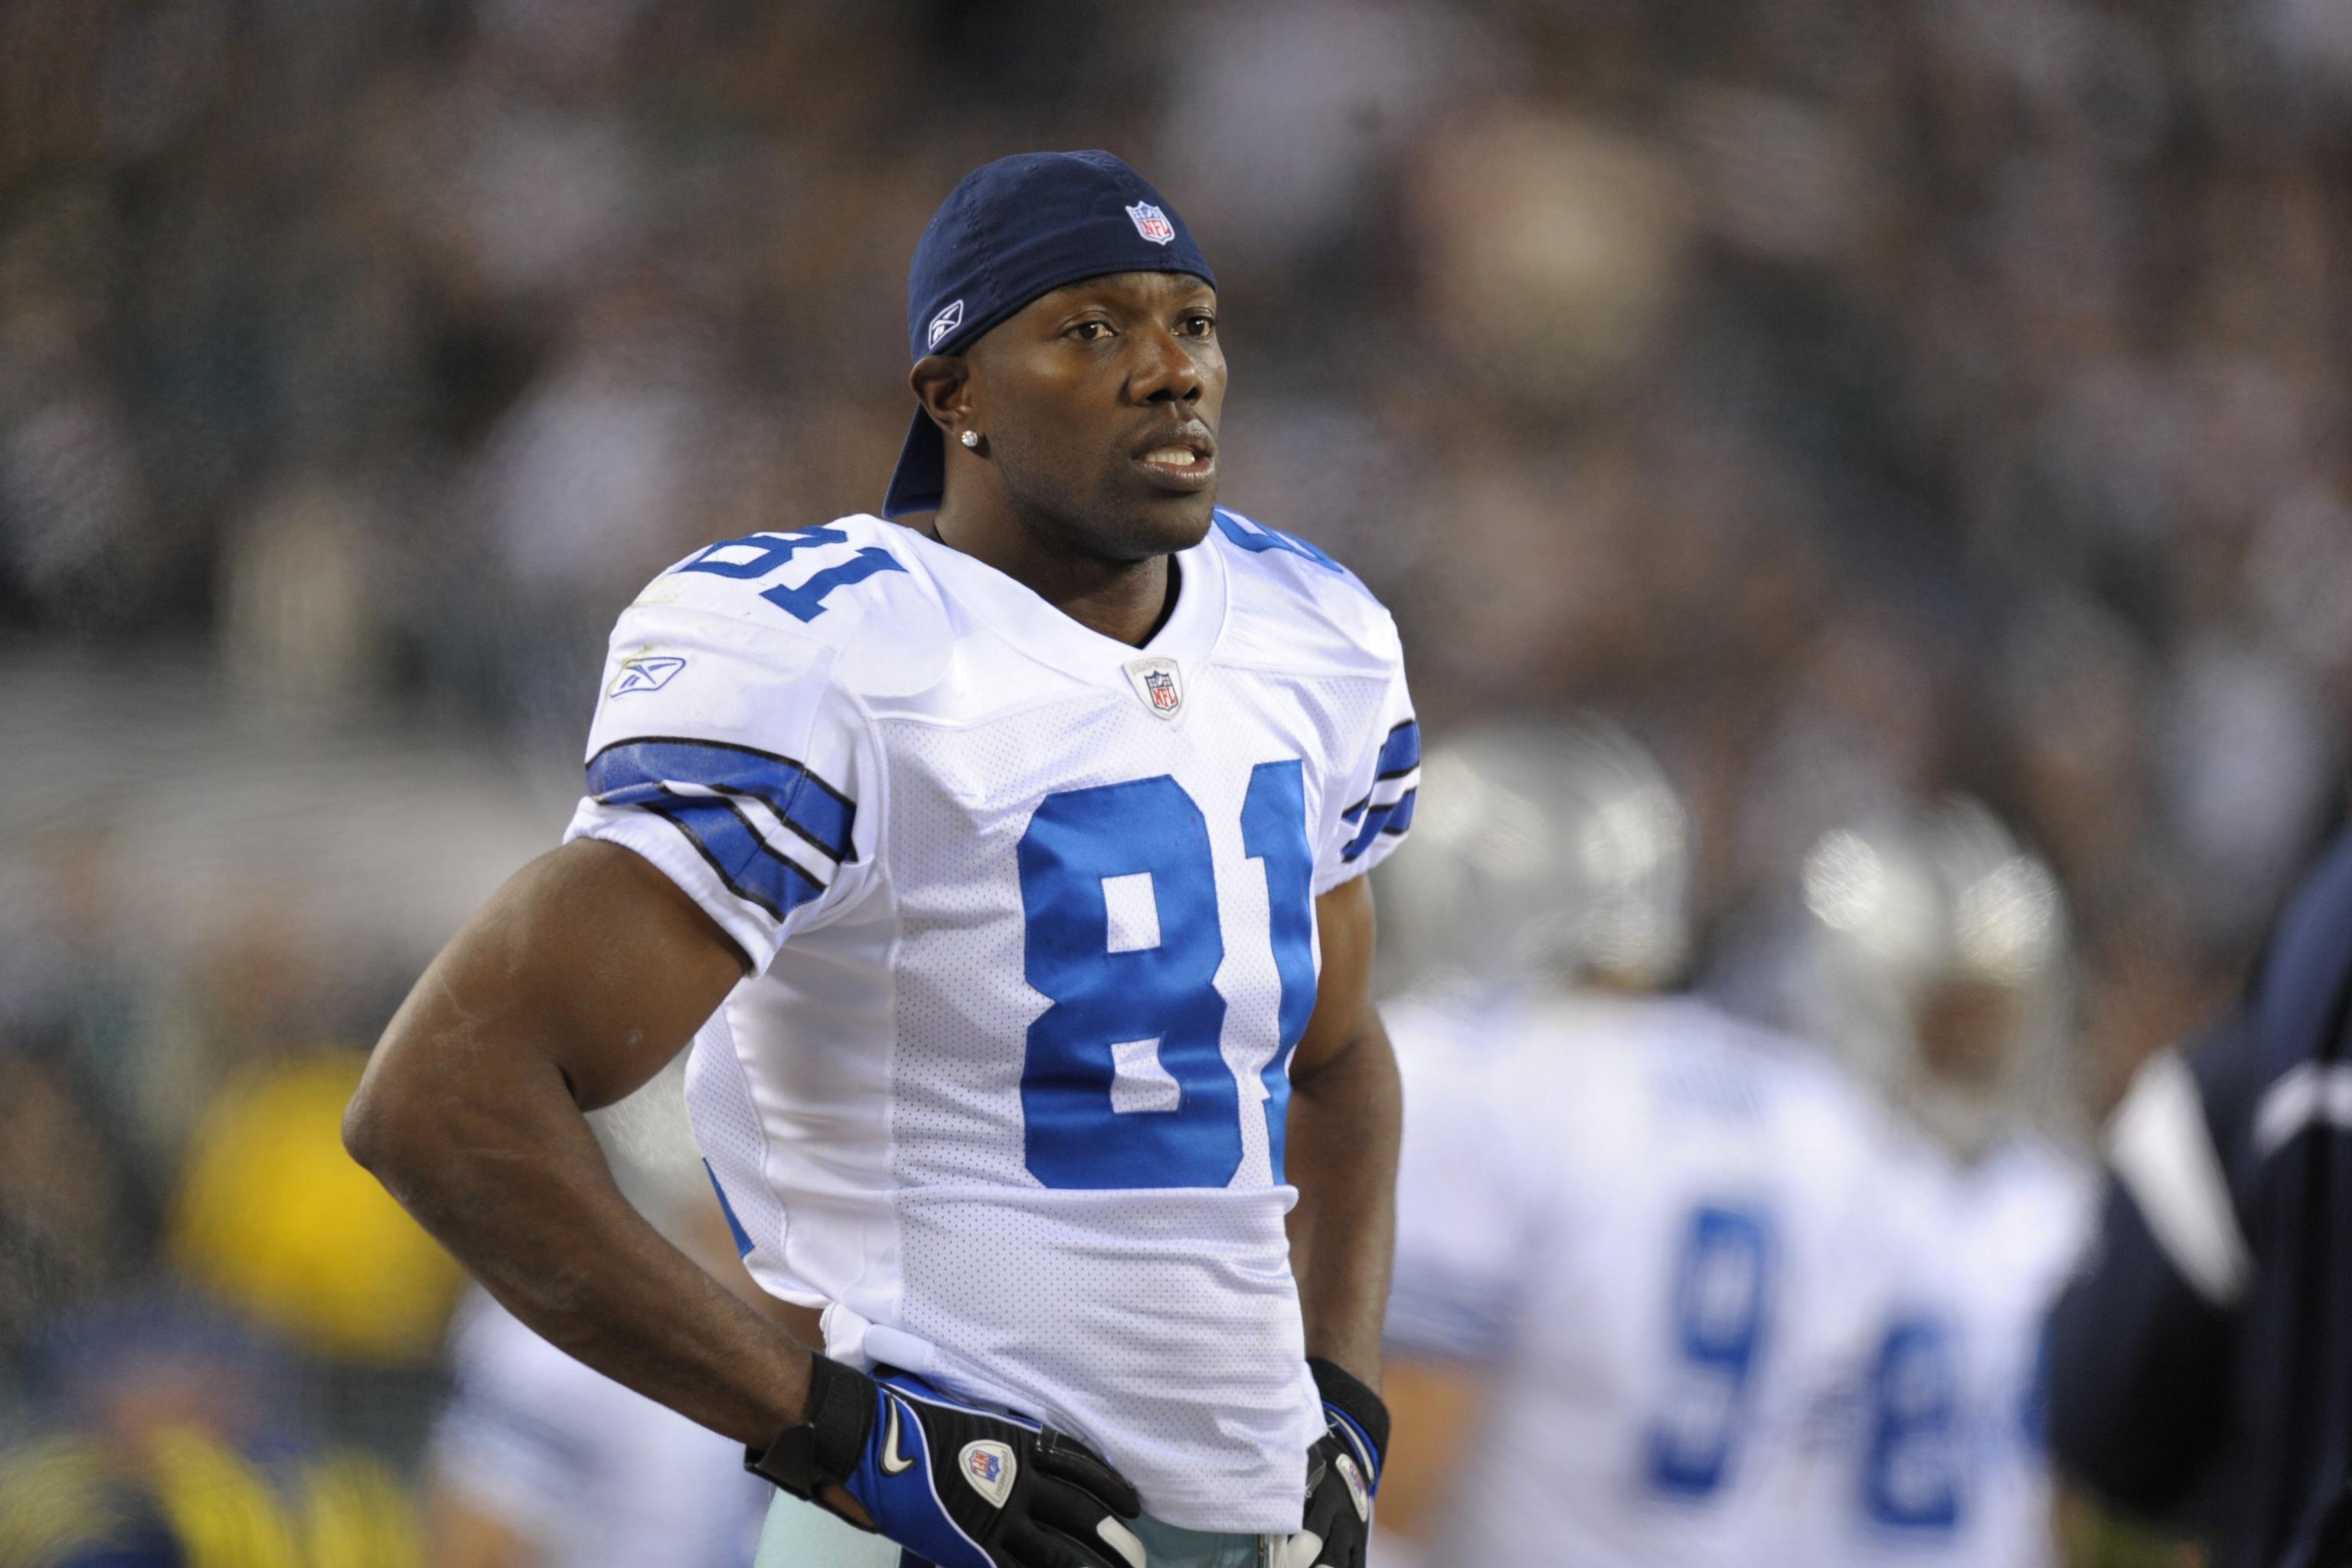 Terrell Owens won't attend Hall of Fame induction